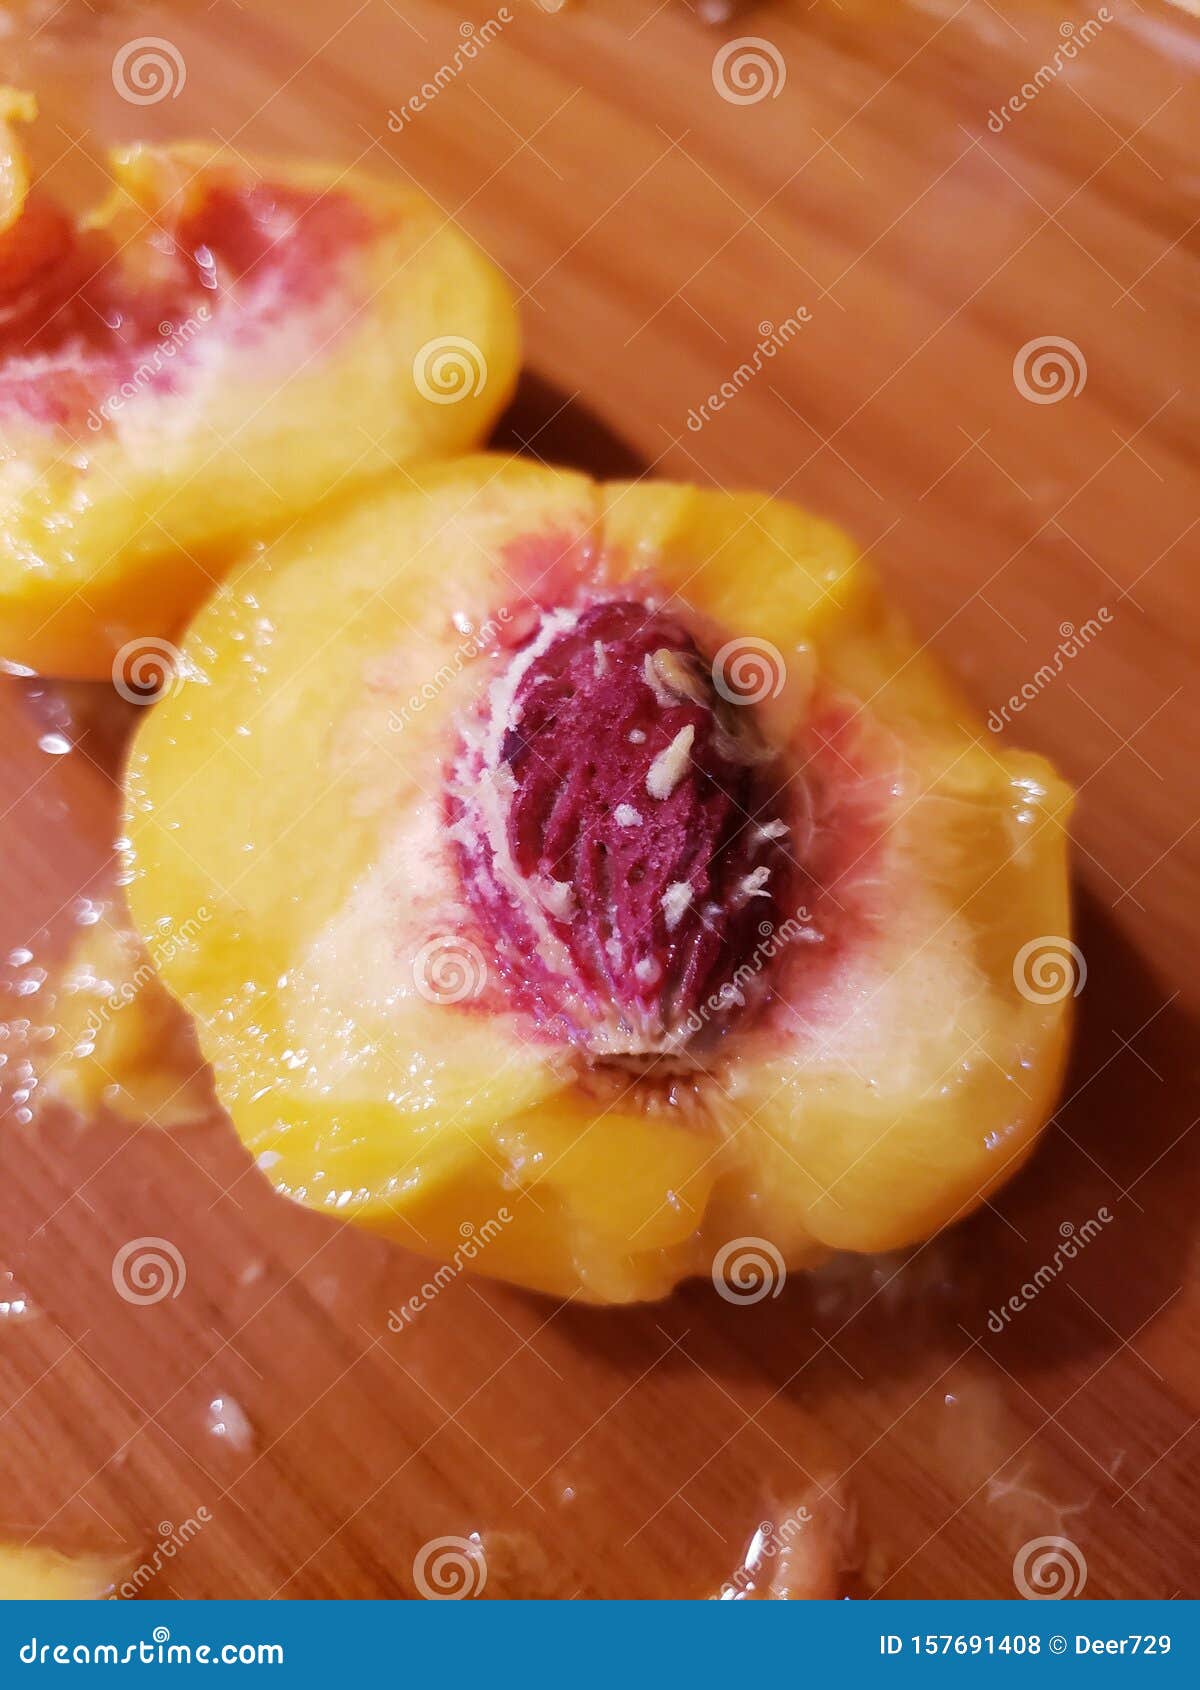 1 033 Peach Pit Photos Free Royalty Free Stock Photos From Dreamstime